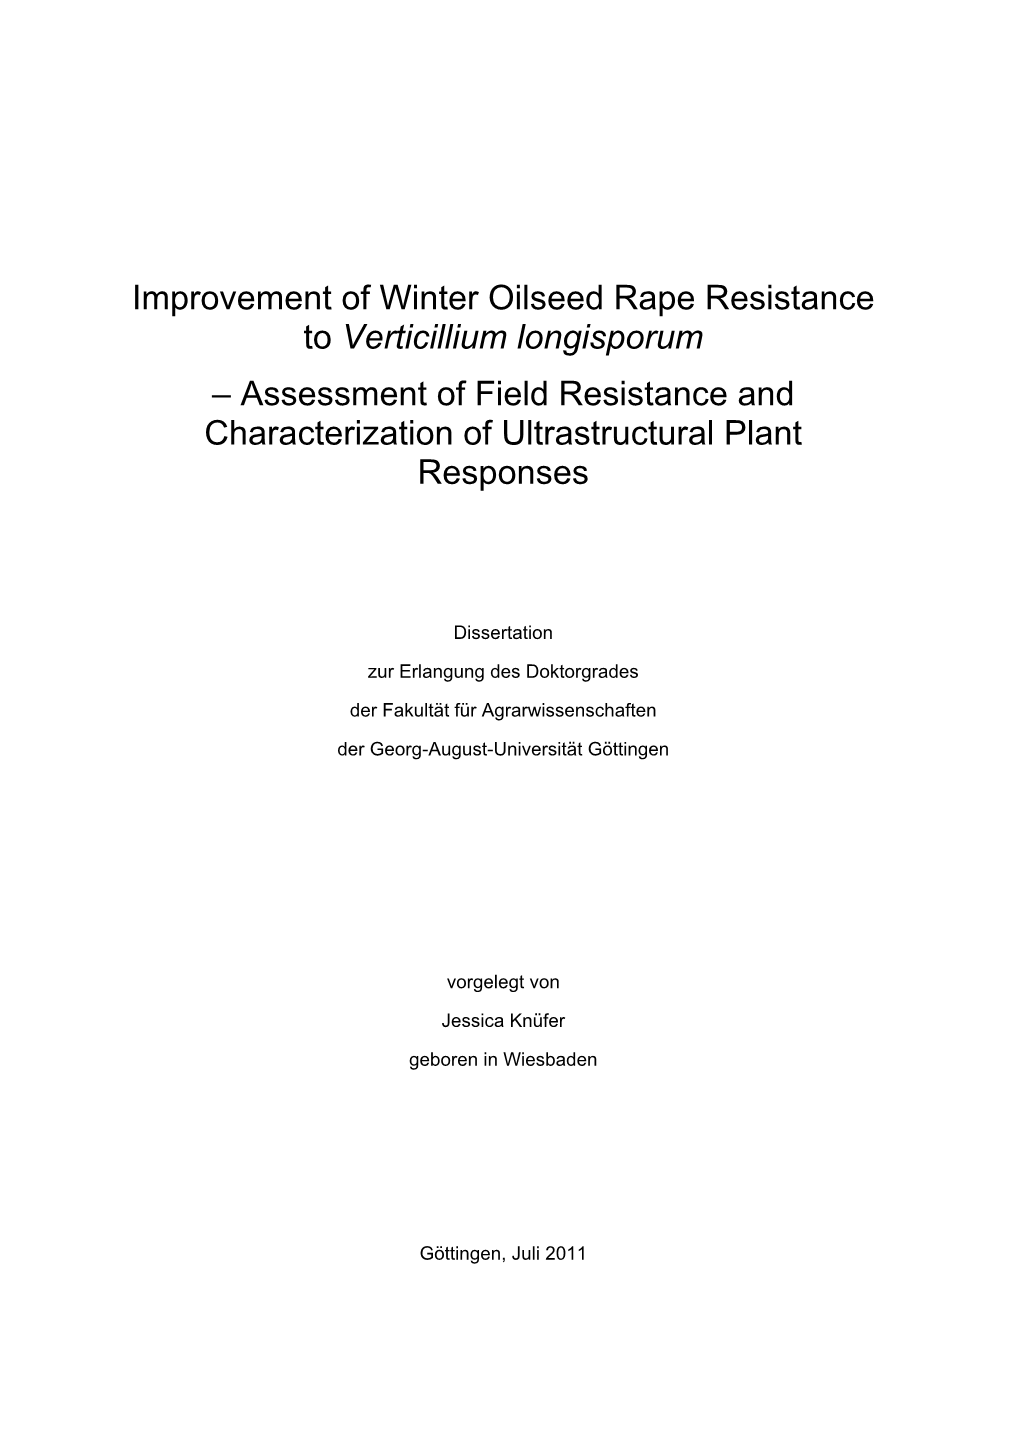 Improvement of Winter Oilseed Rape Resistance to Verticillium Longisporum – Assessment of Field Resistance and Characterization of Ultrastructural Plant Responses